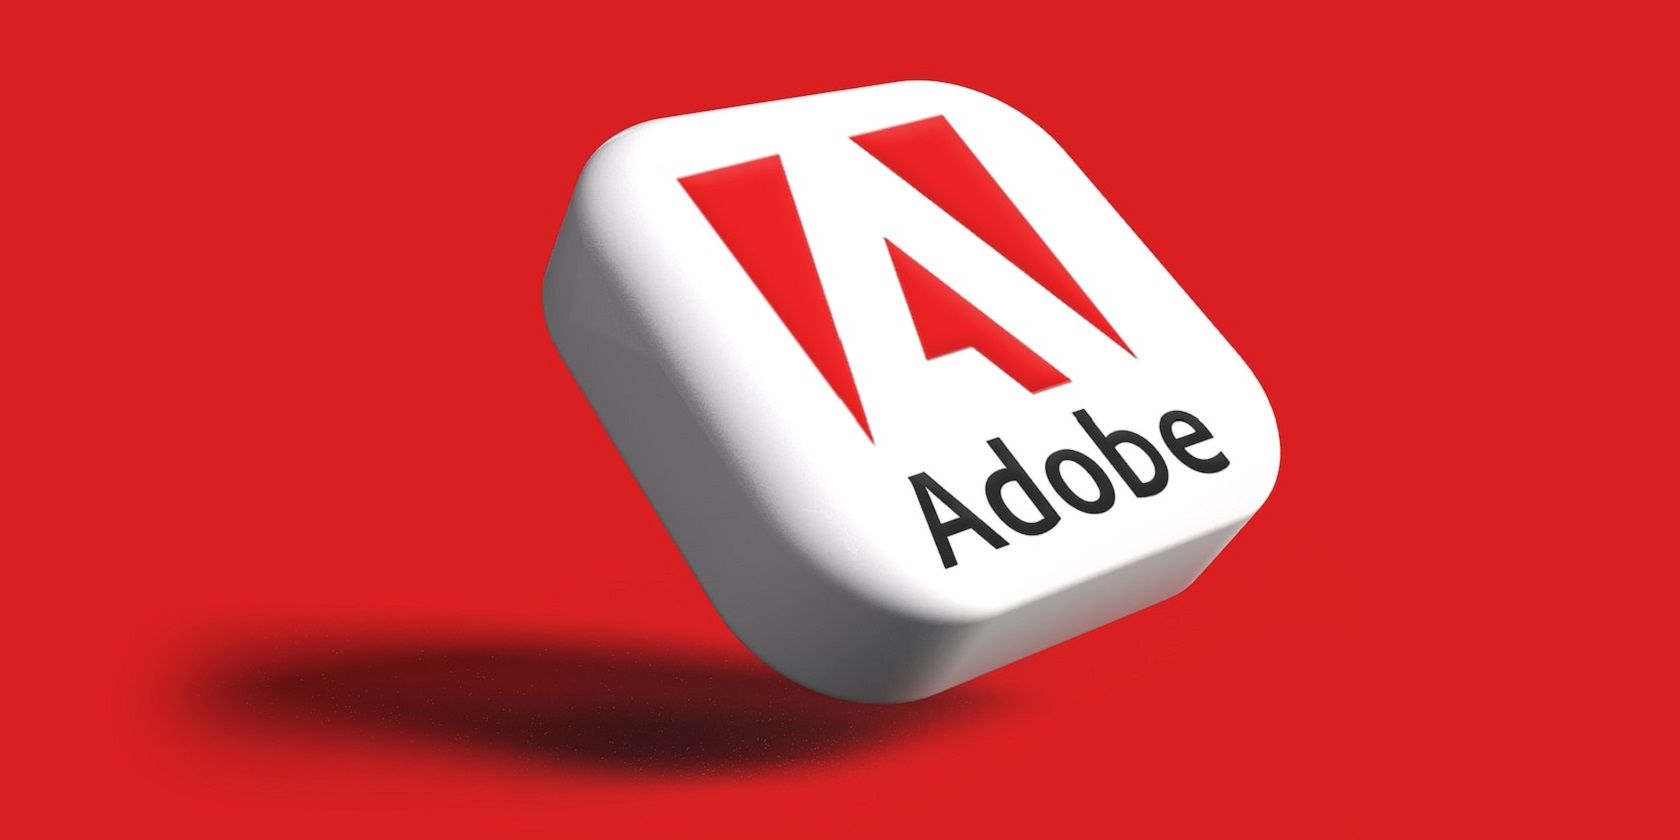 The Adobe logo right next to a red background